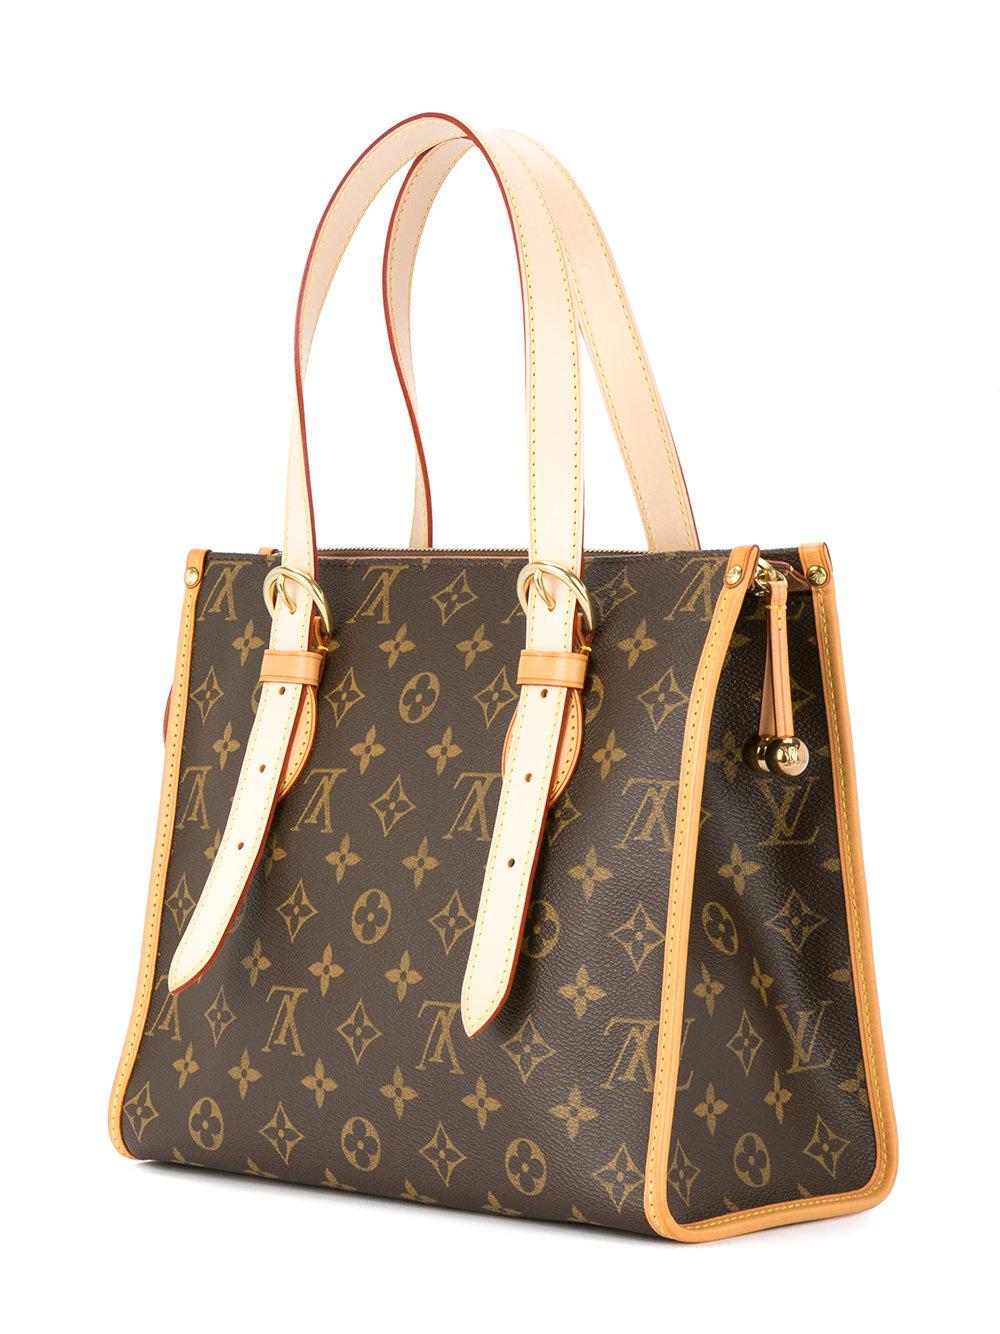 Brown Louis Vuitton Cross Body Bags - Up to 70% off at Tradesy